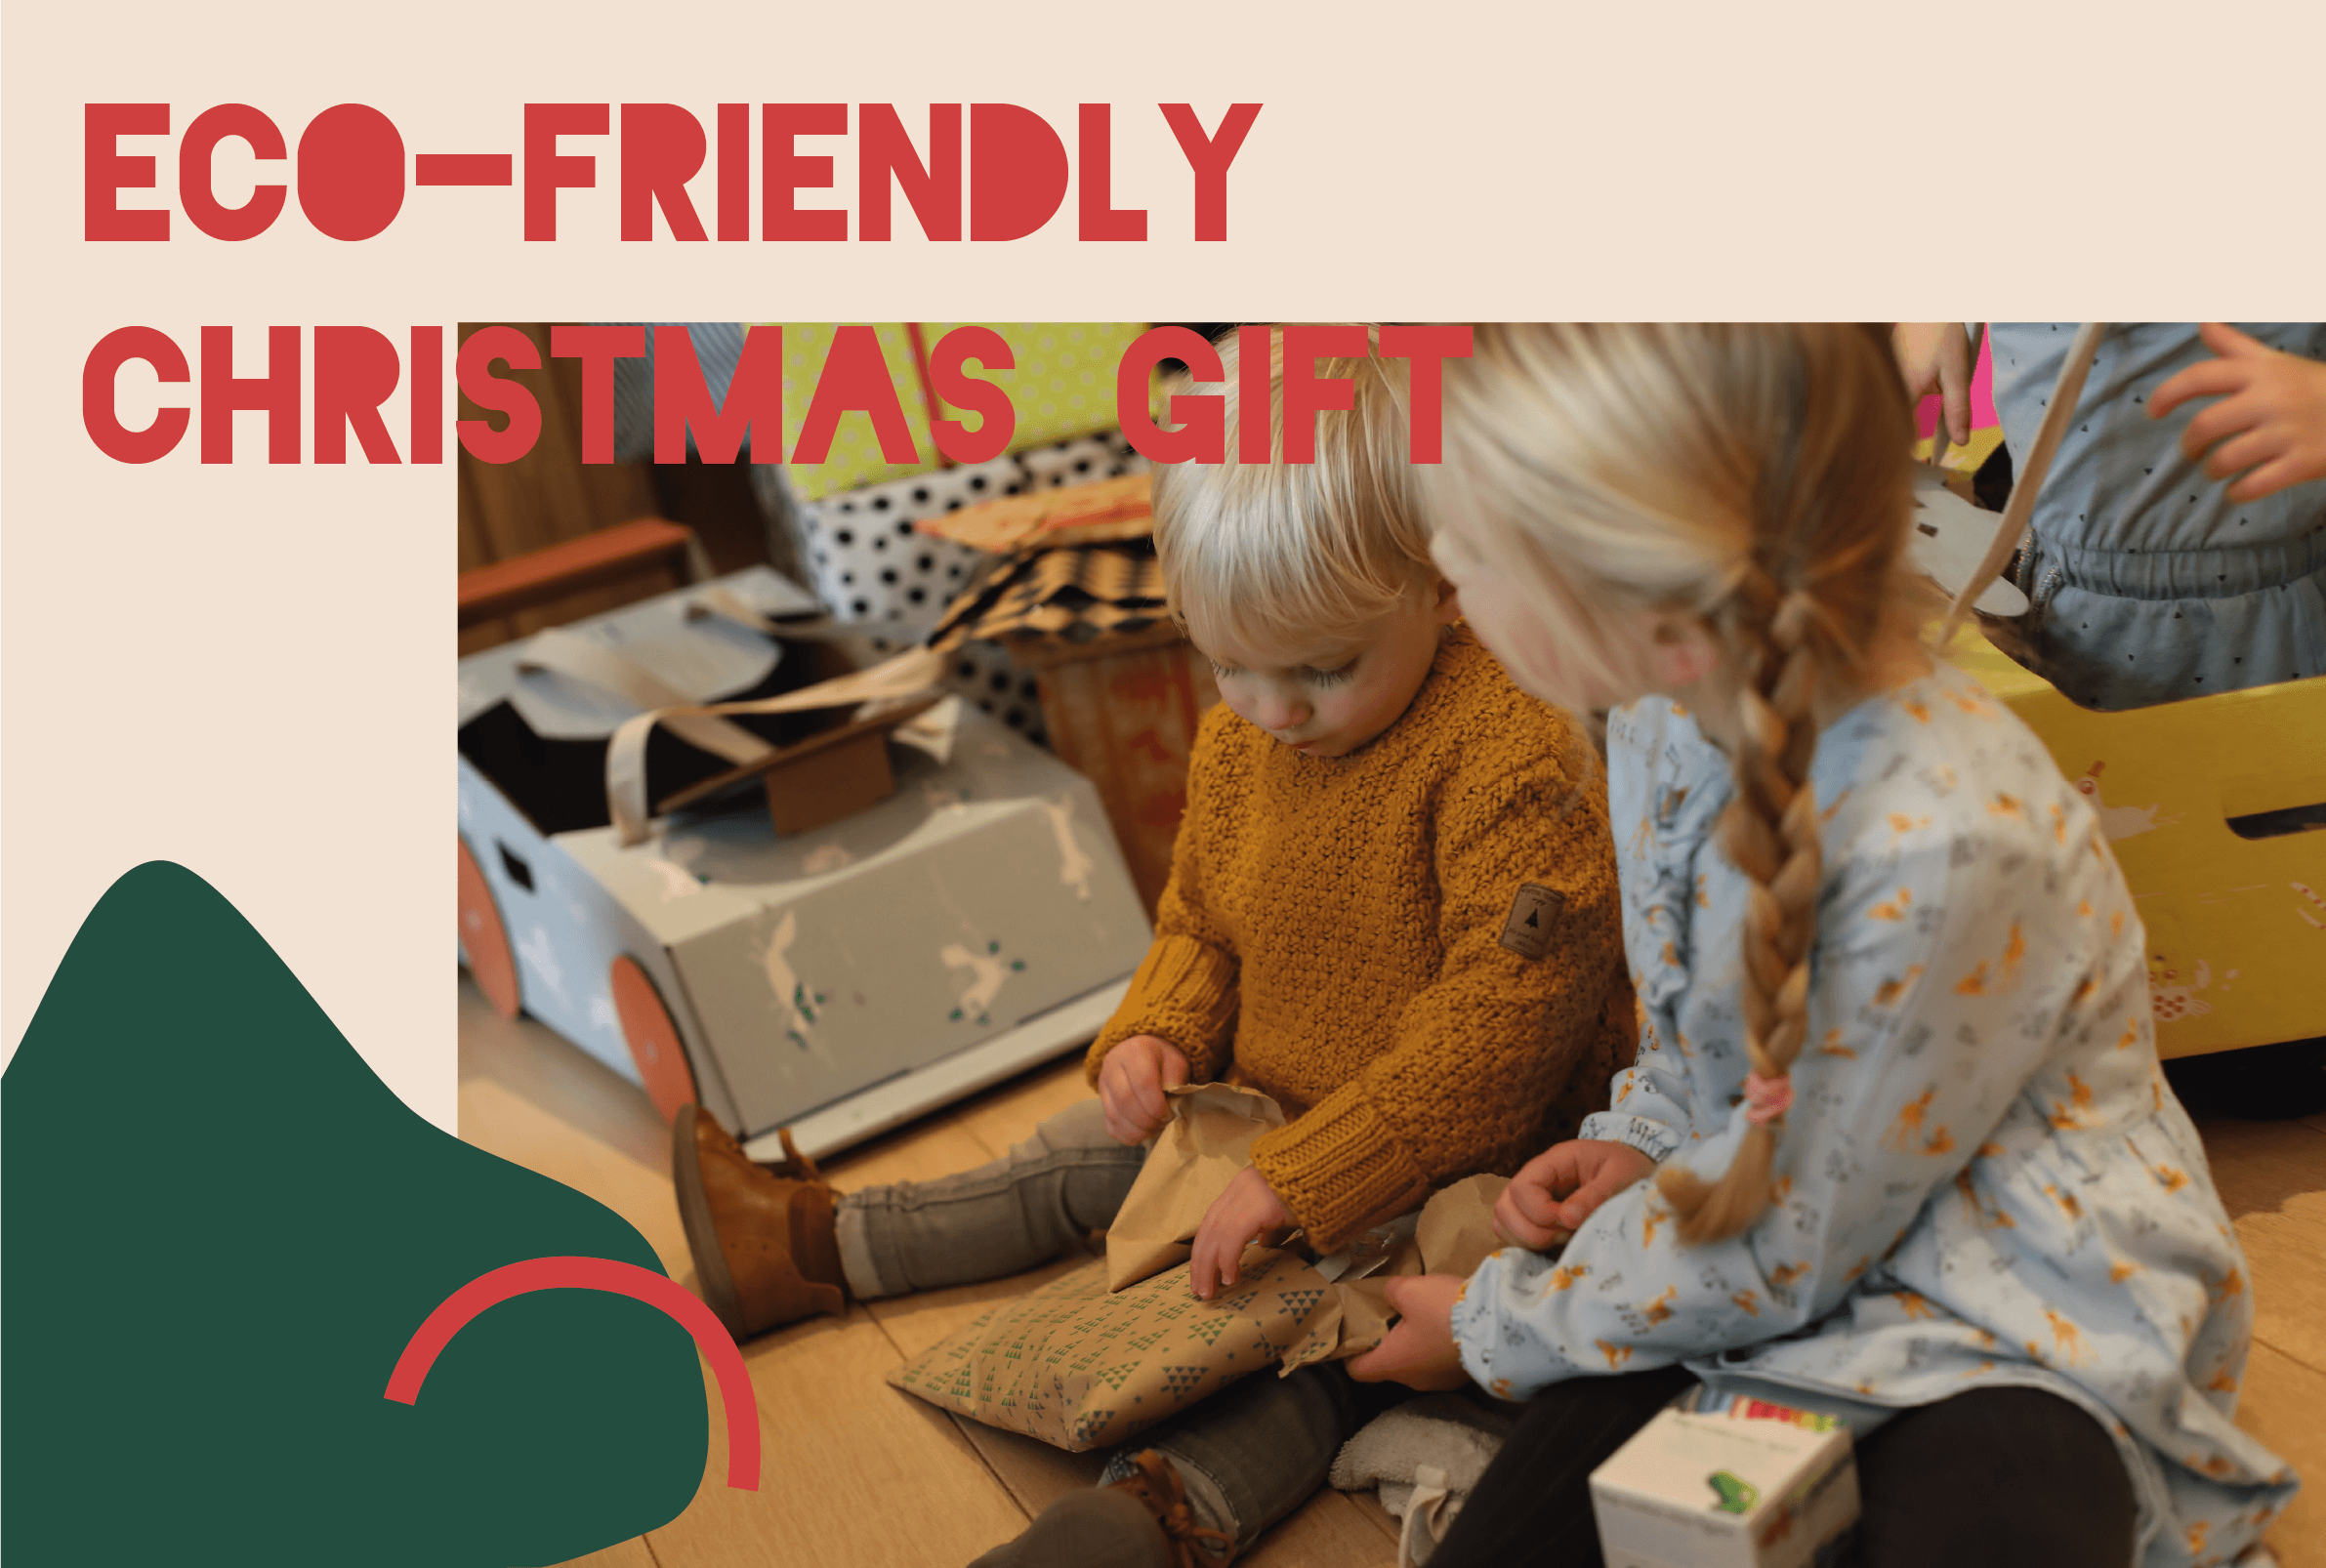 10 eco-friendly children's gifts for Christmas